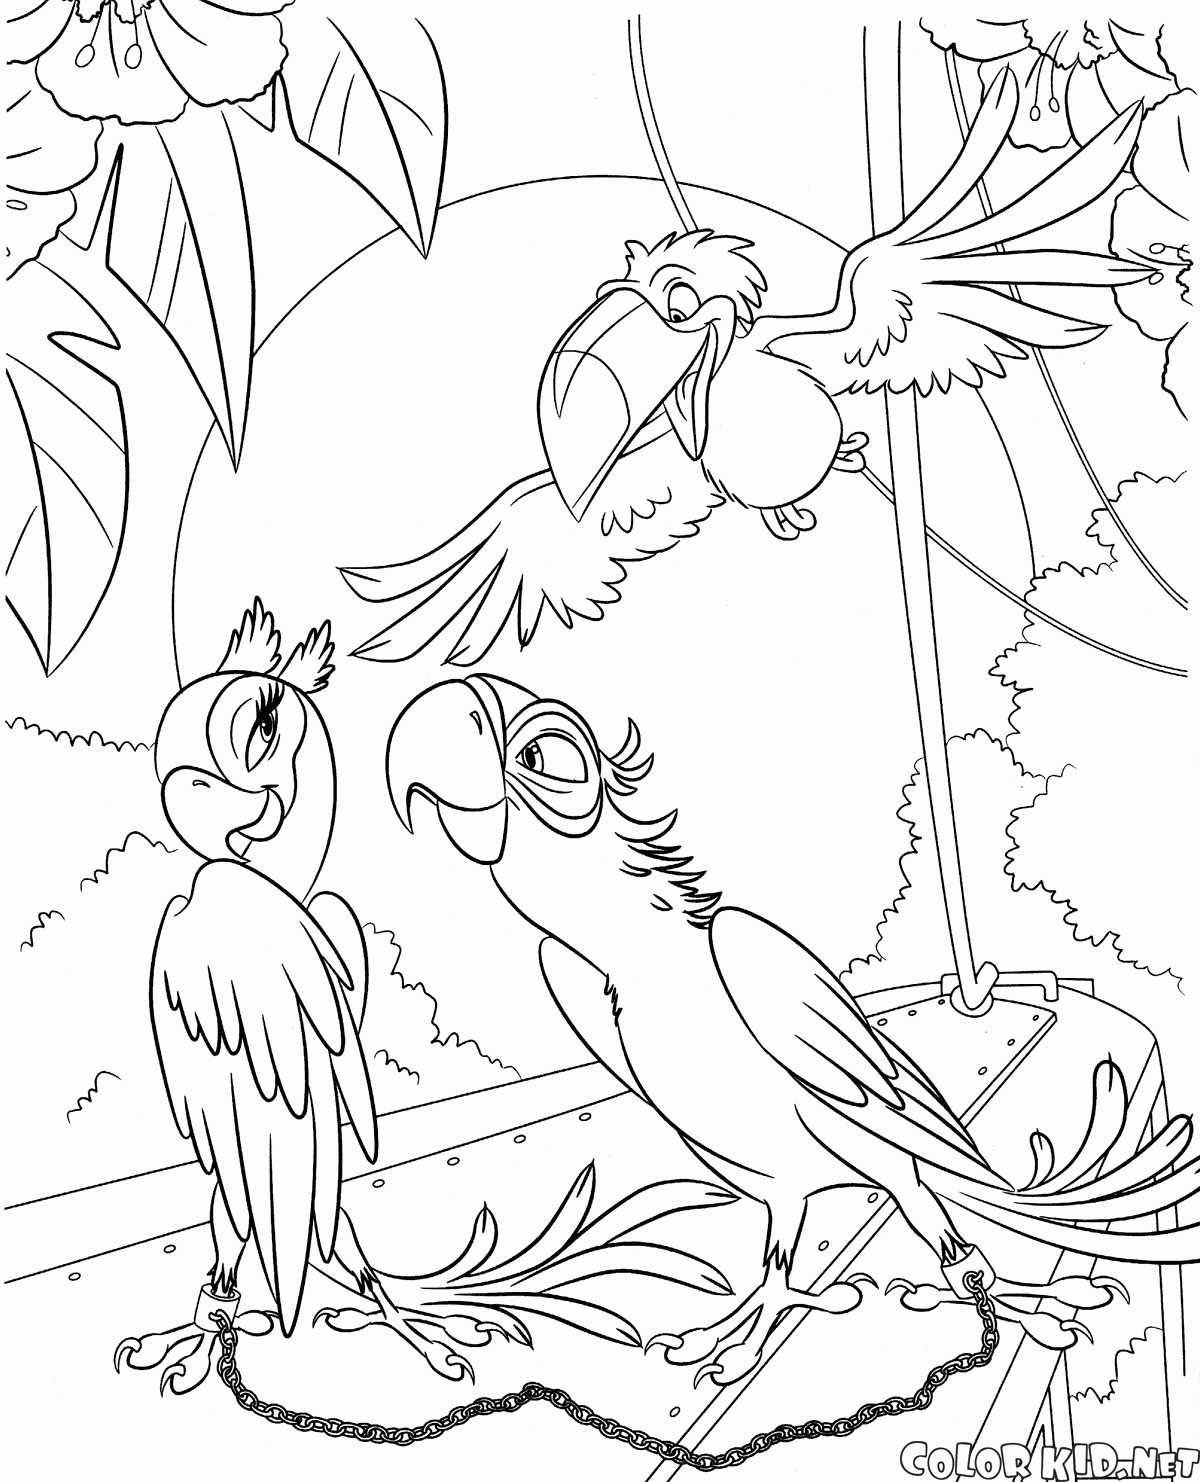 Coloring page - Blu and Jewel